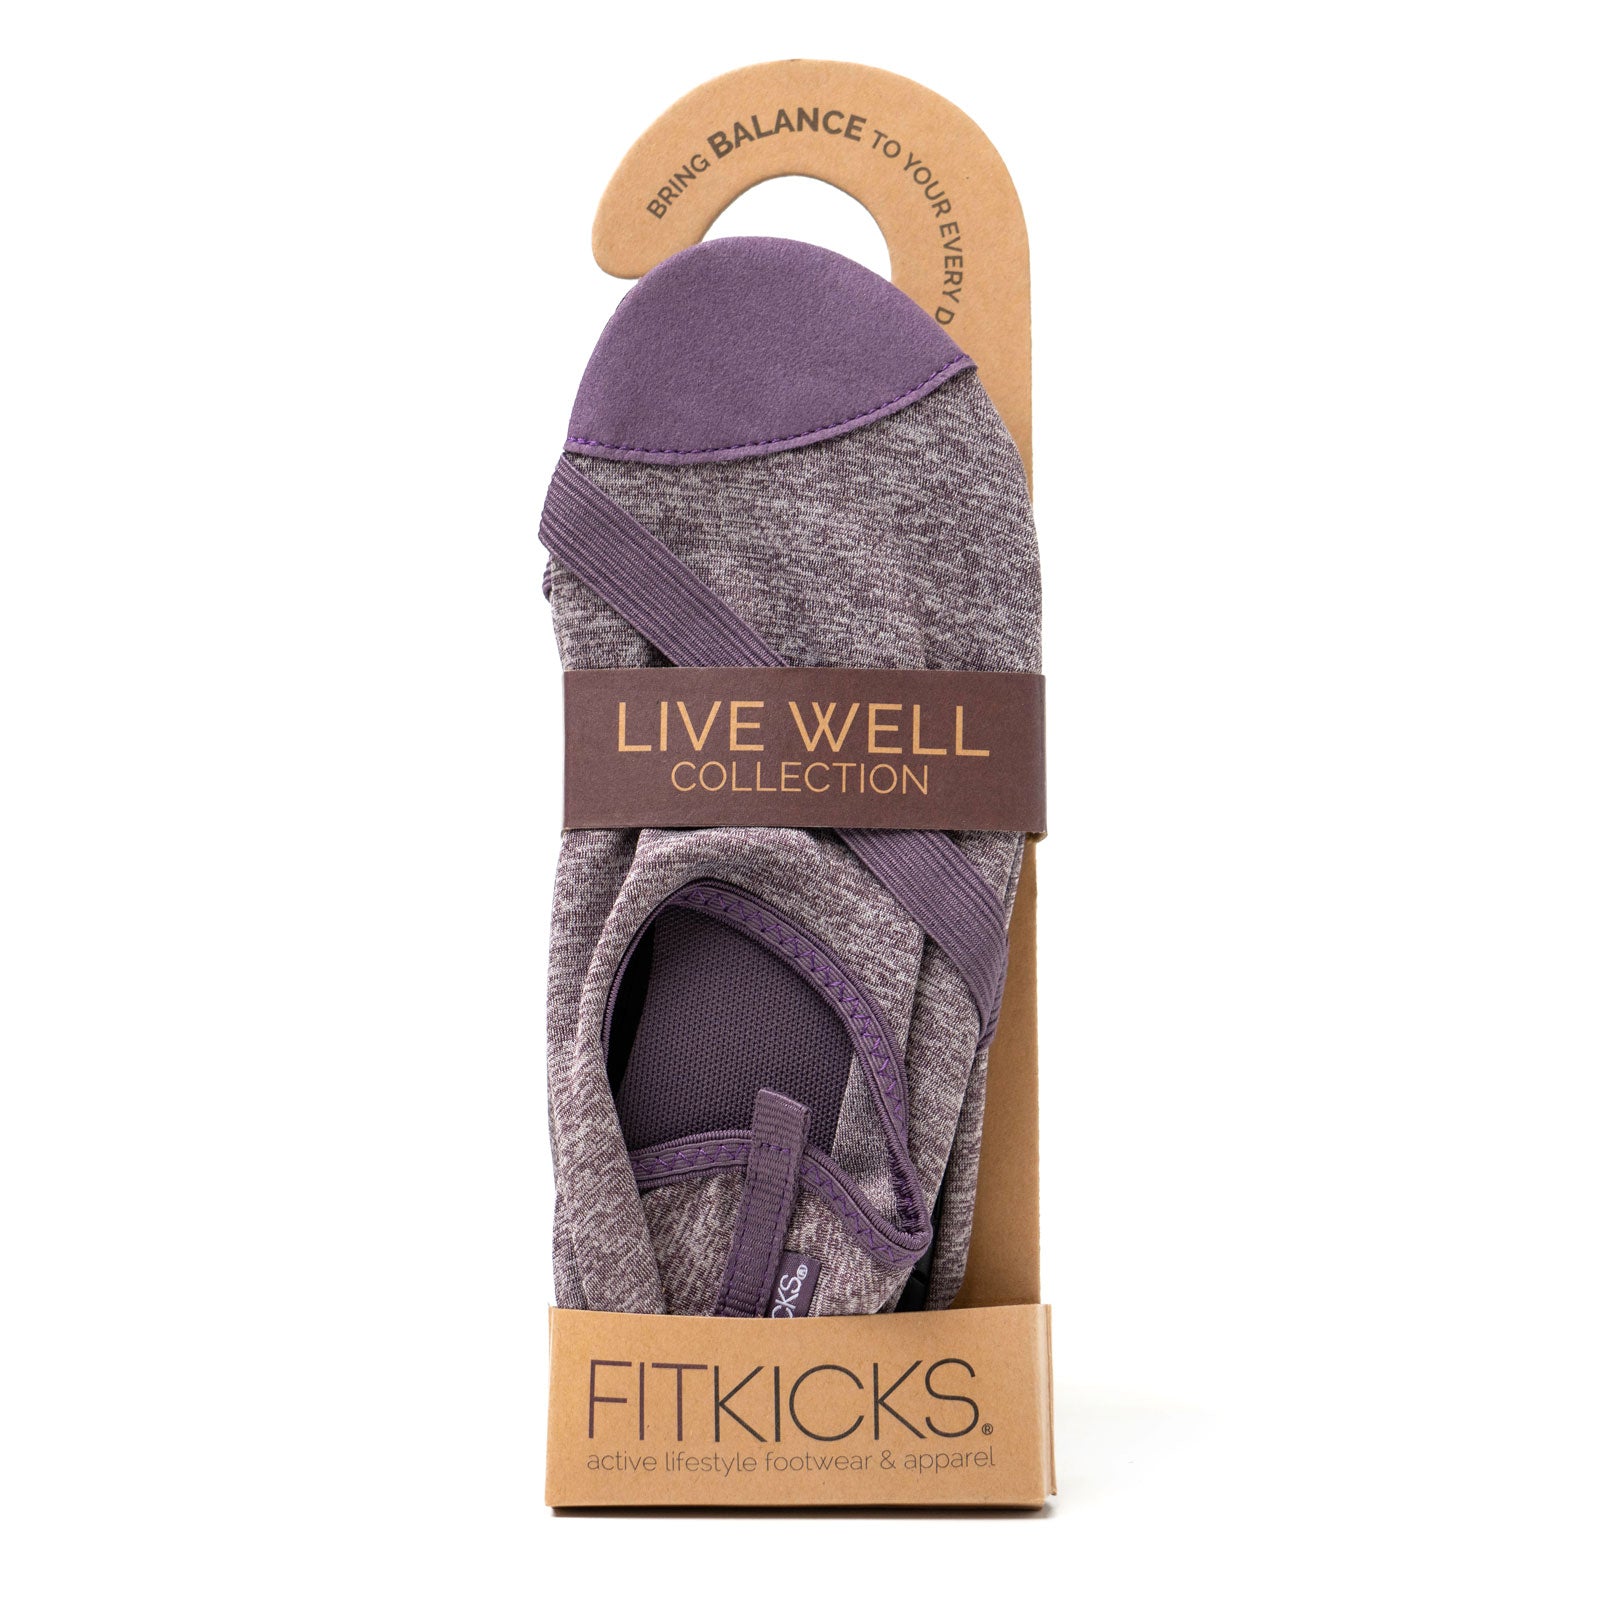 FITKICKS Women's Everyday Wear Active Lifestyle Footwear